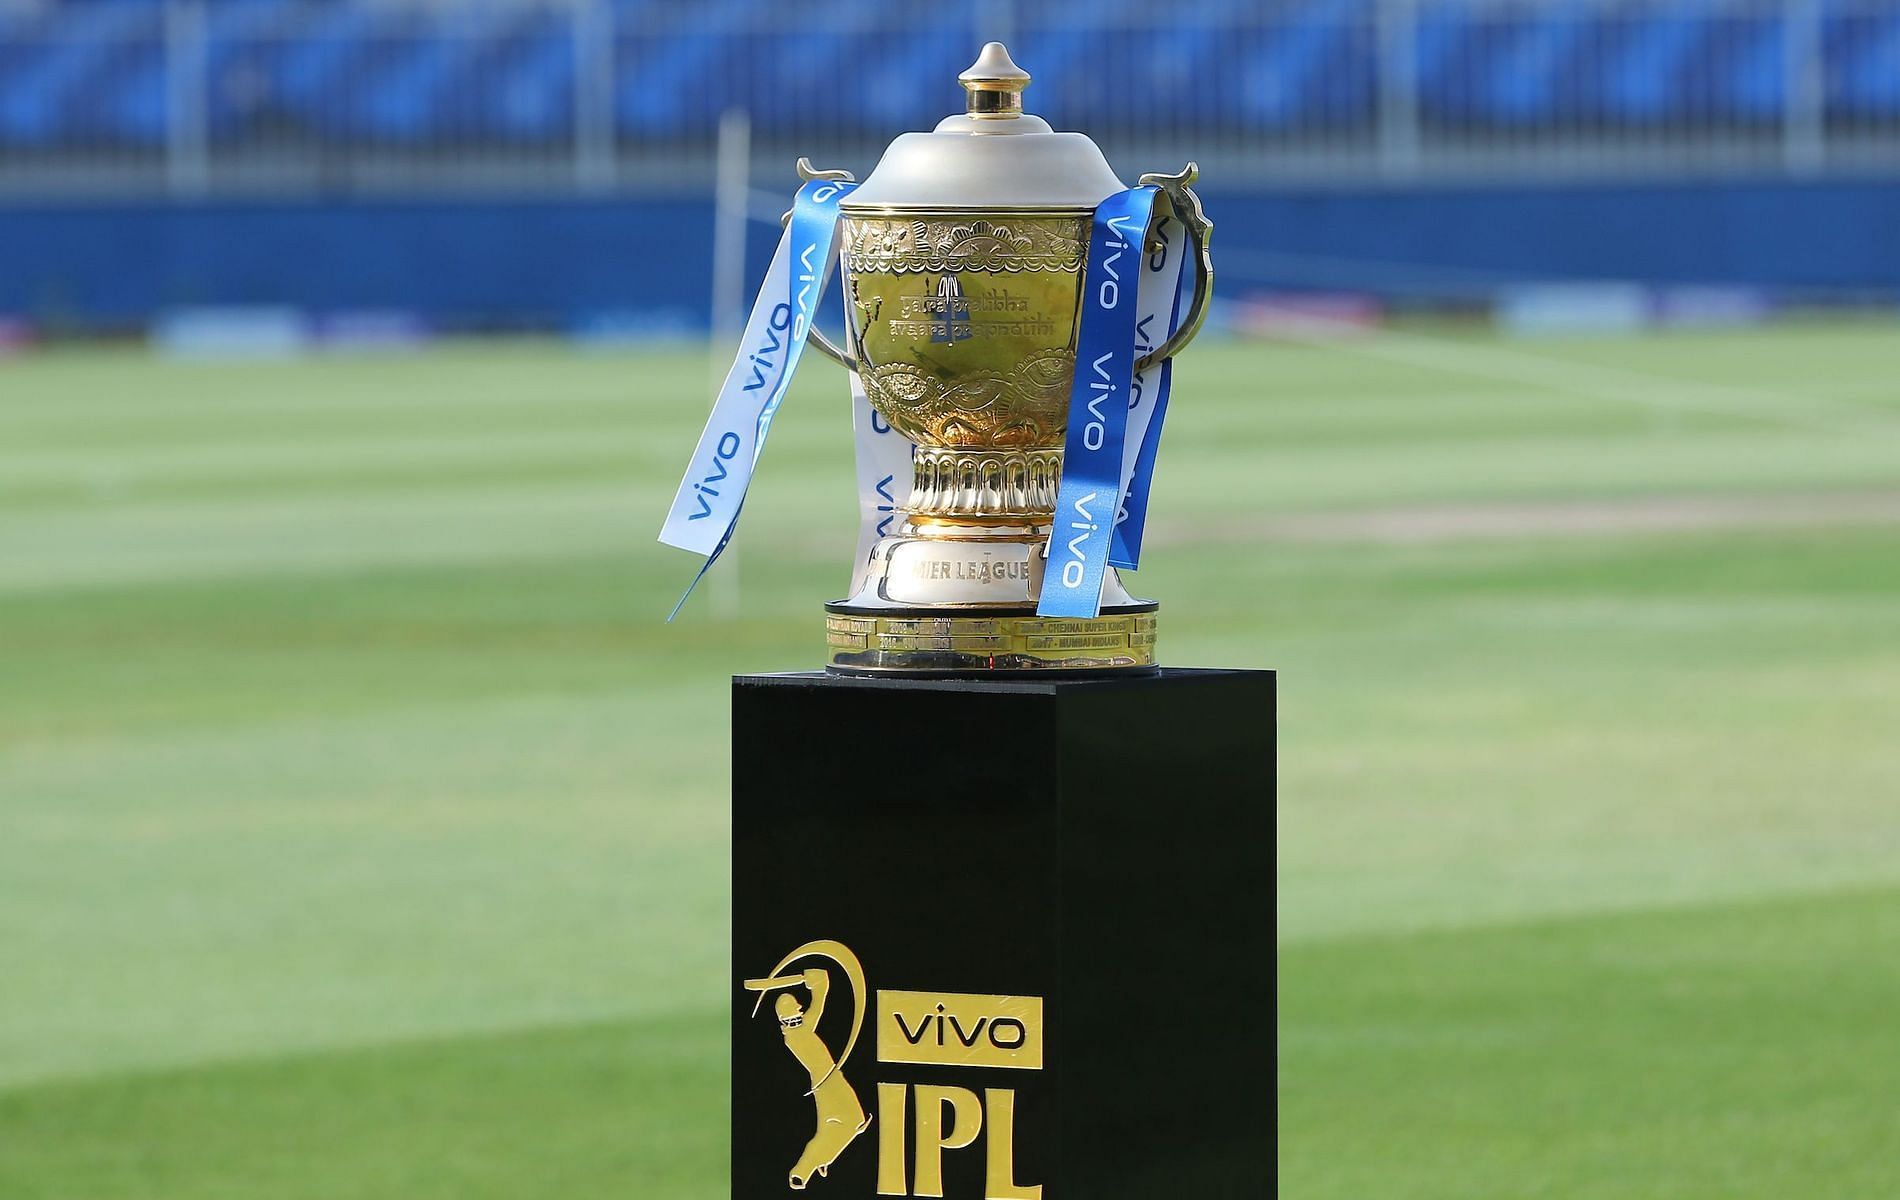 The IPL will have 10 teams starting from the 2022 season.